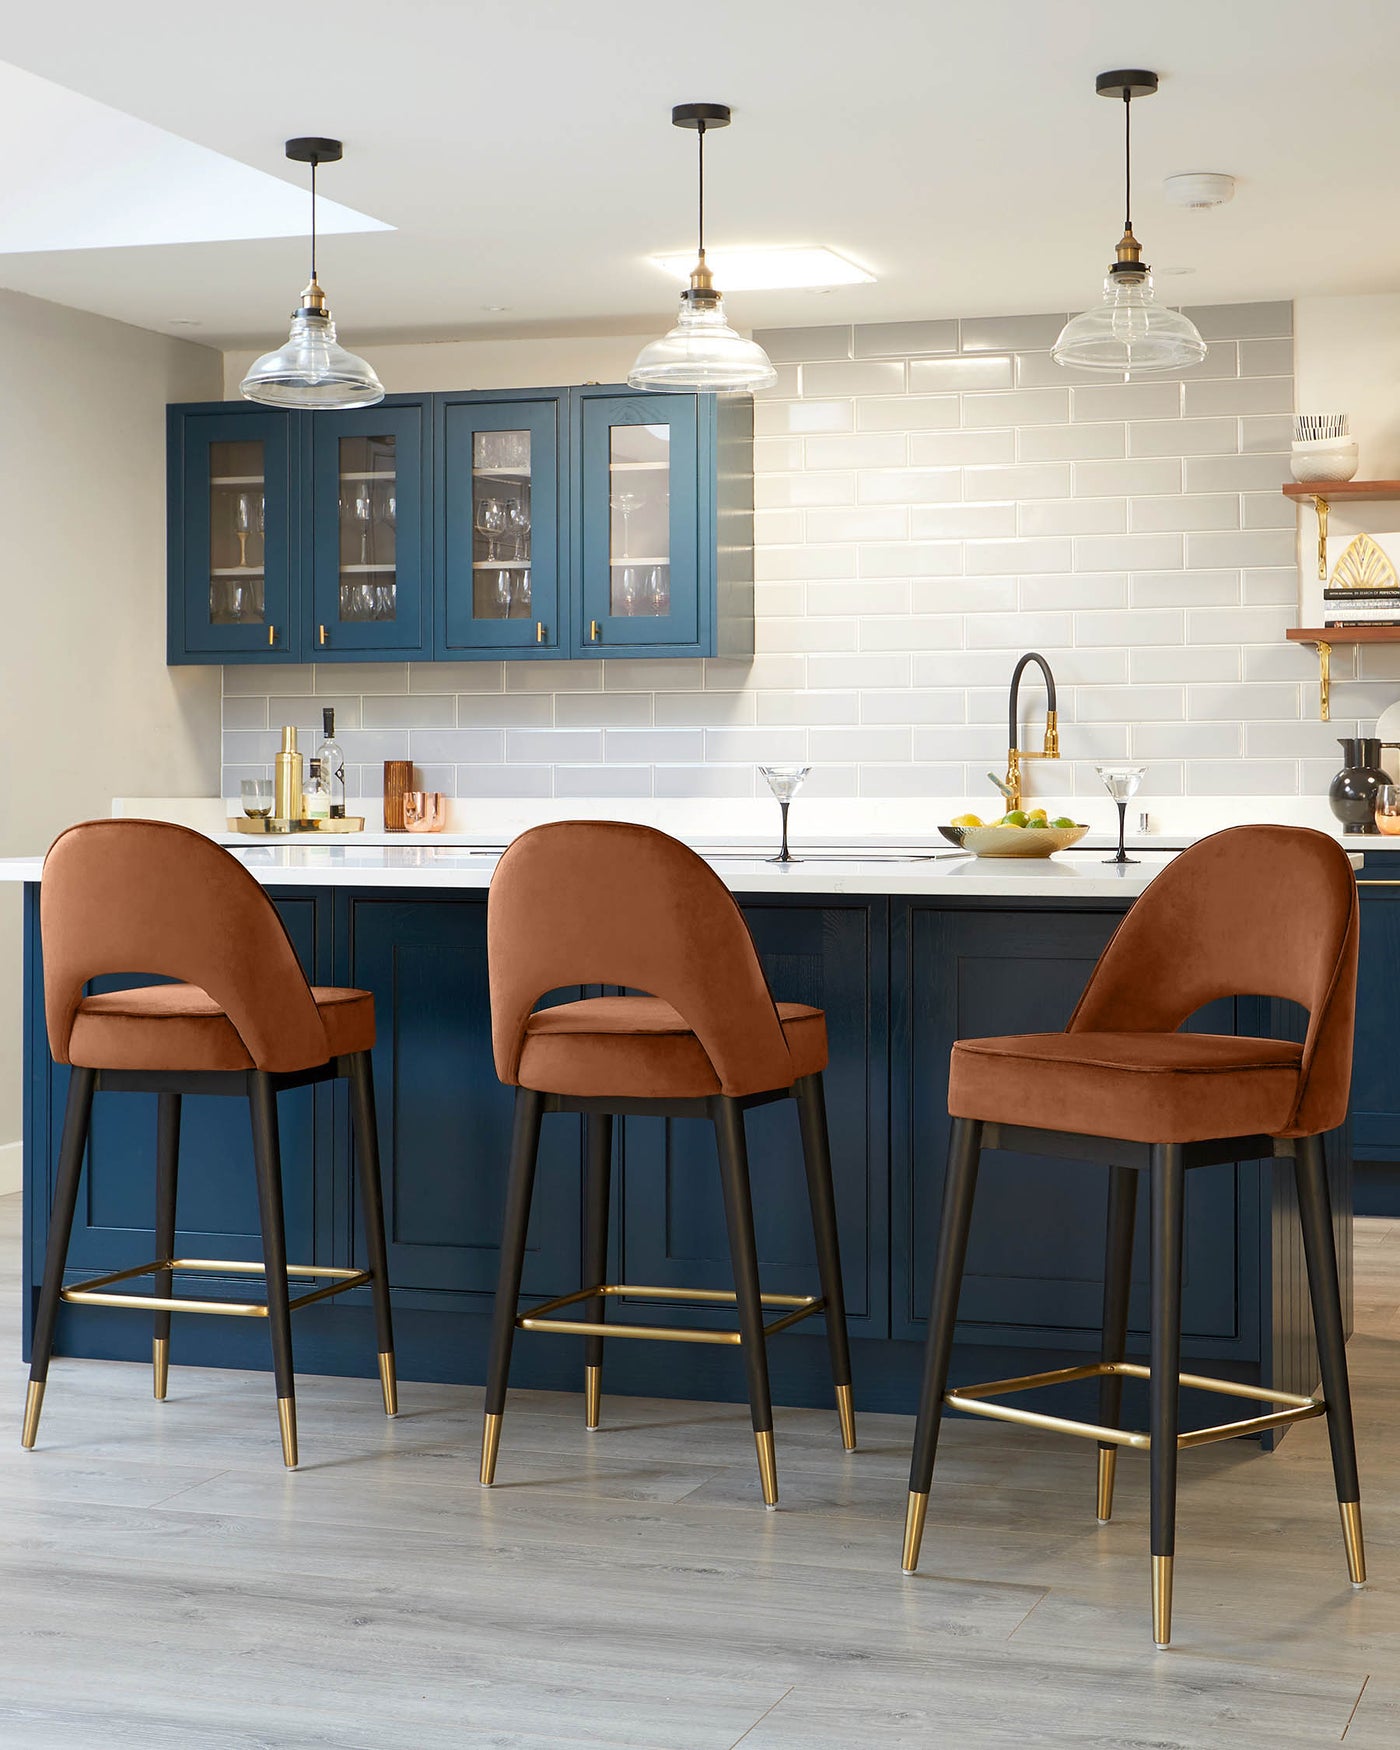 Three modern bar stools with sleek design, featuring burnt orange velvet upholstered seats and backrests, black legs with brass accents, and a footrest.